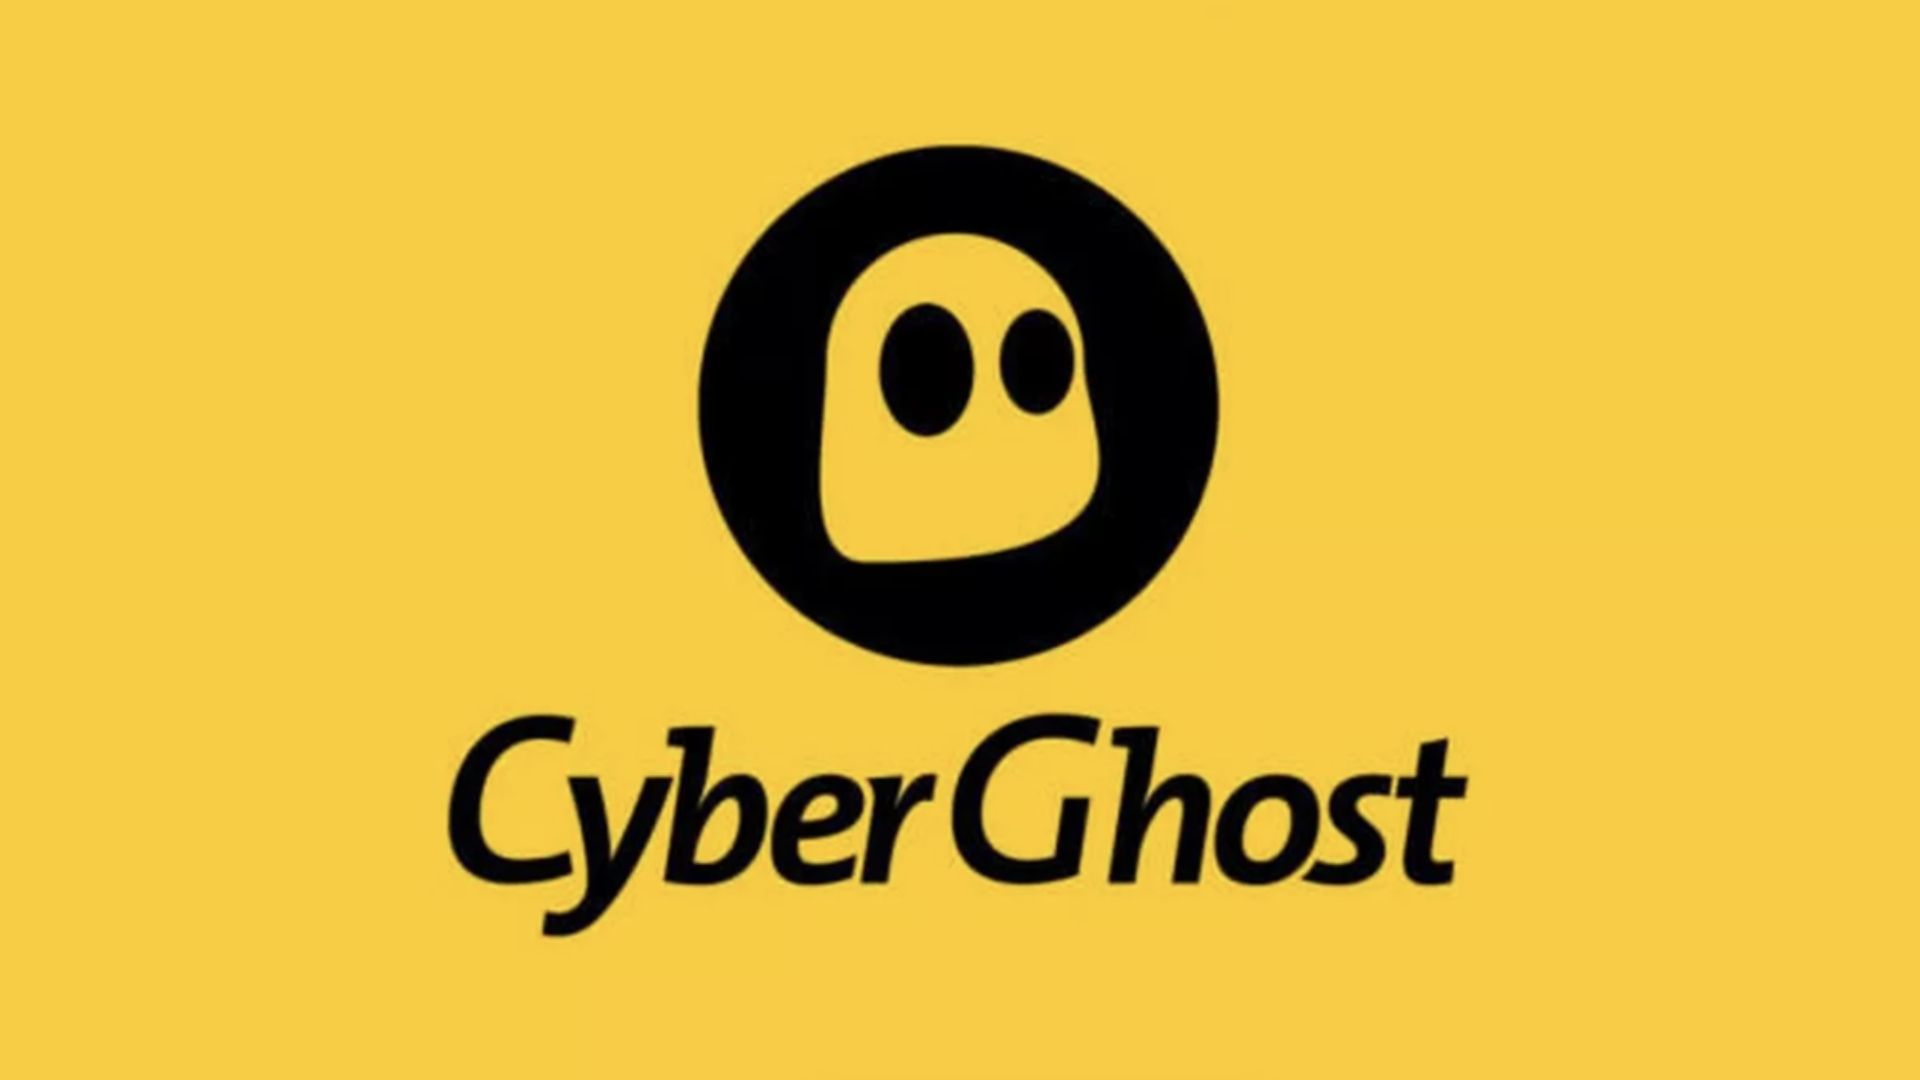 Best Linux VPN: CyberGhost. Image shows the company logo.